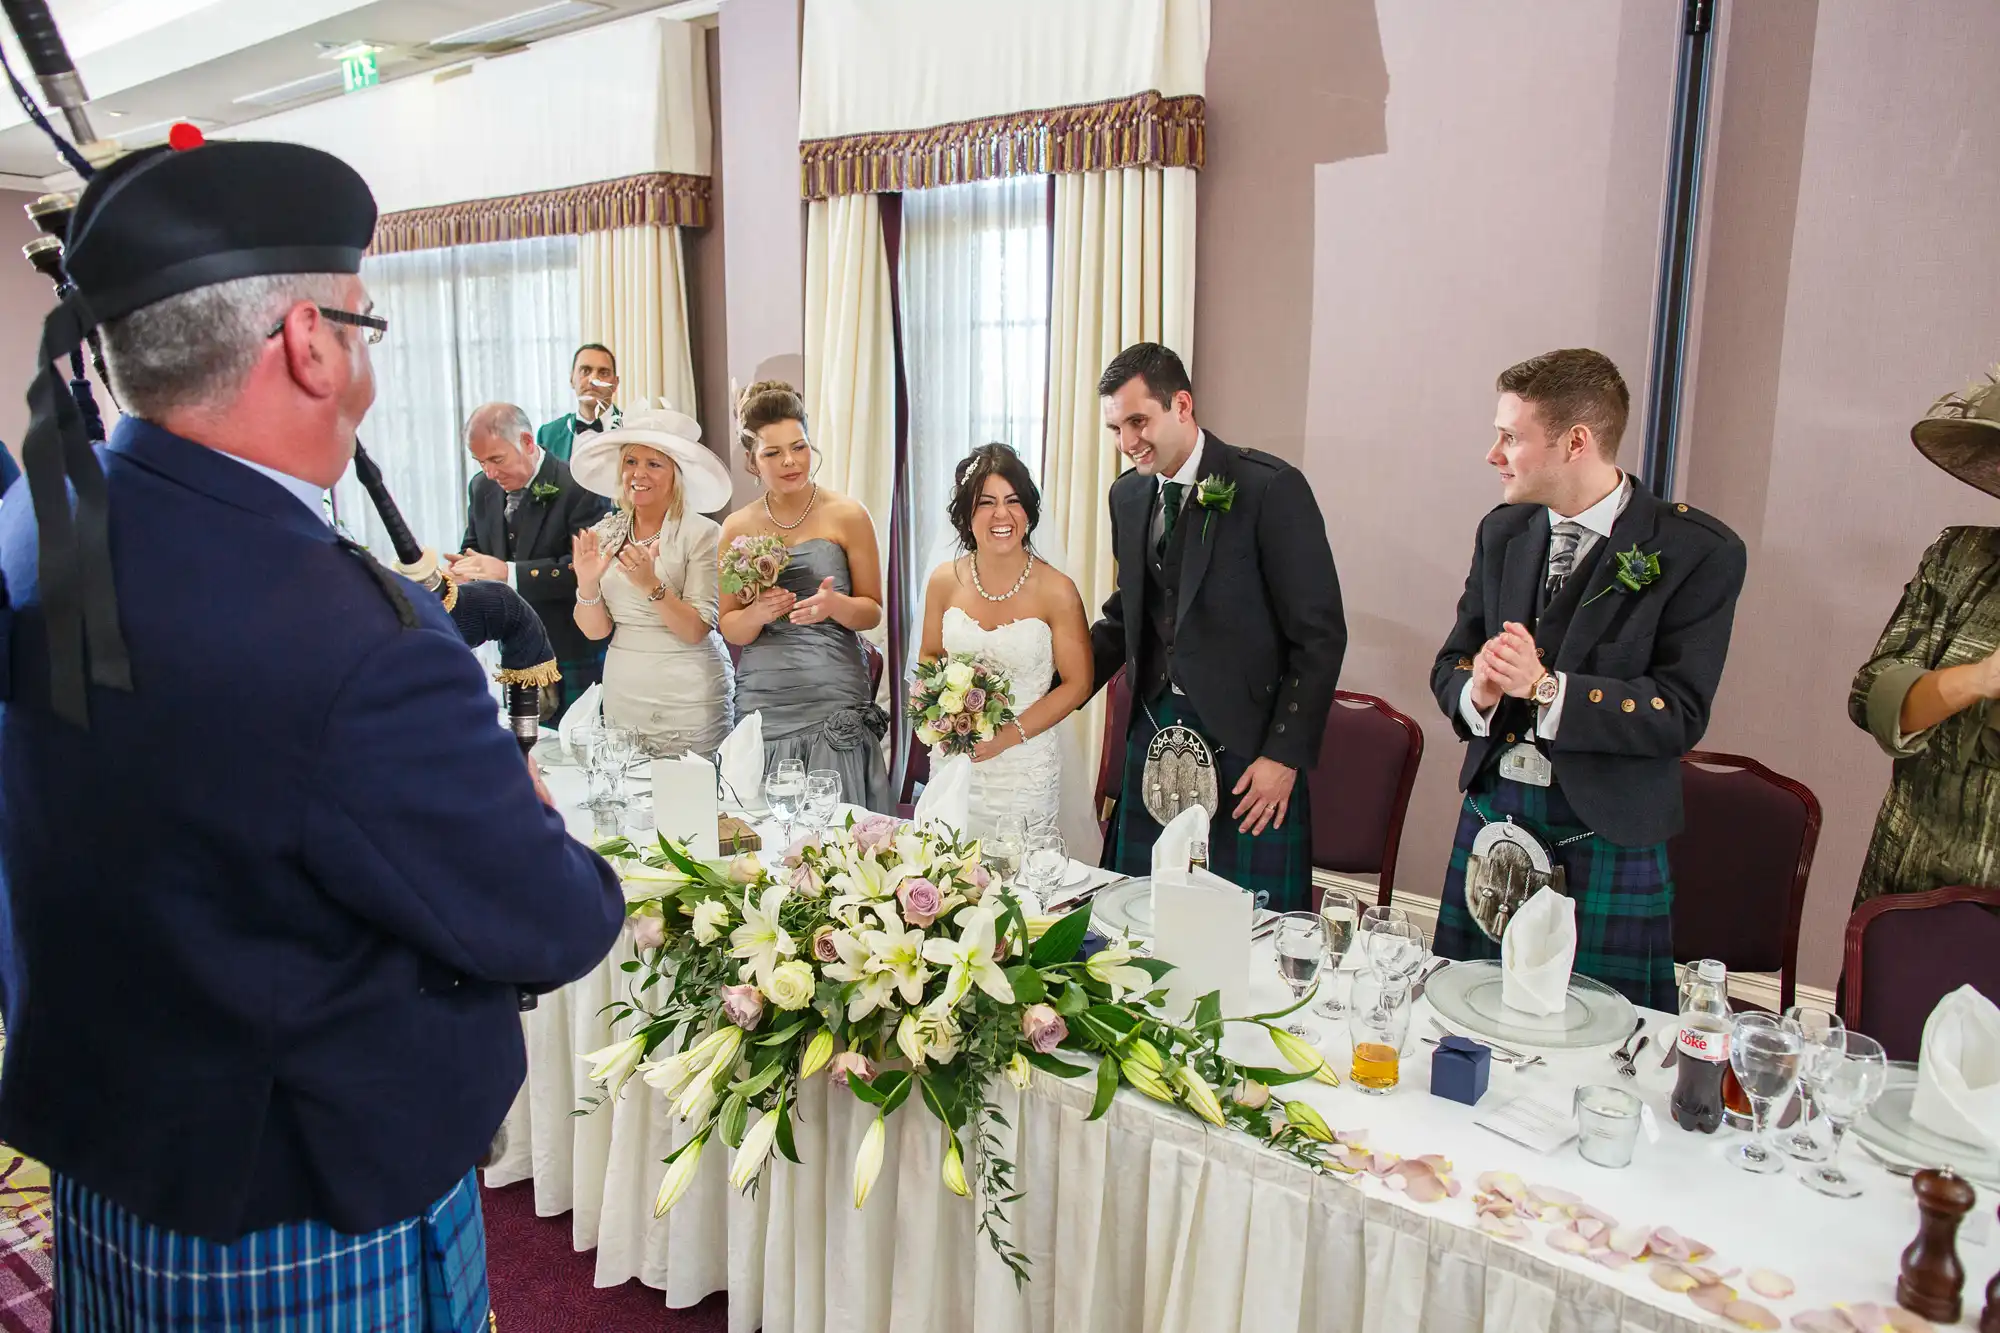 A wedding reception scene with guests smiling at a man in a kilt speaking at the head table, where a bride and groom stand beside floral arrangements.